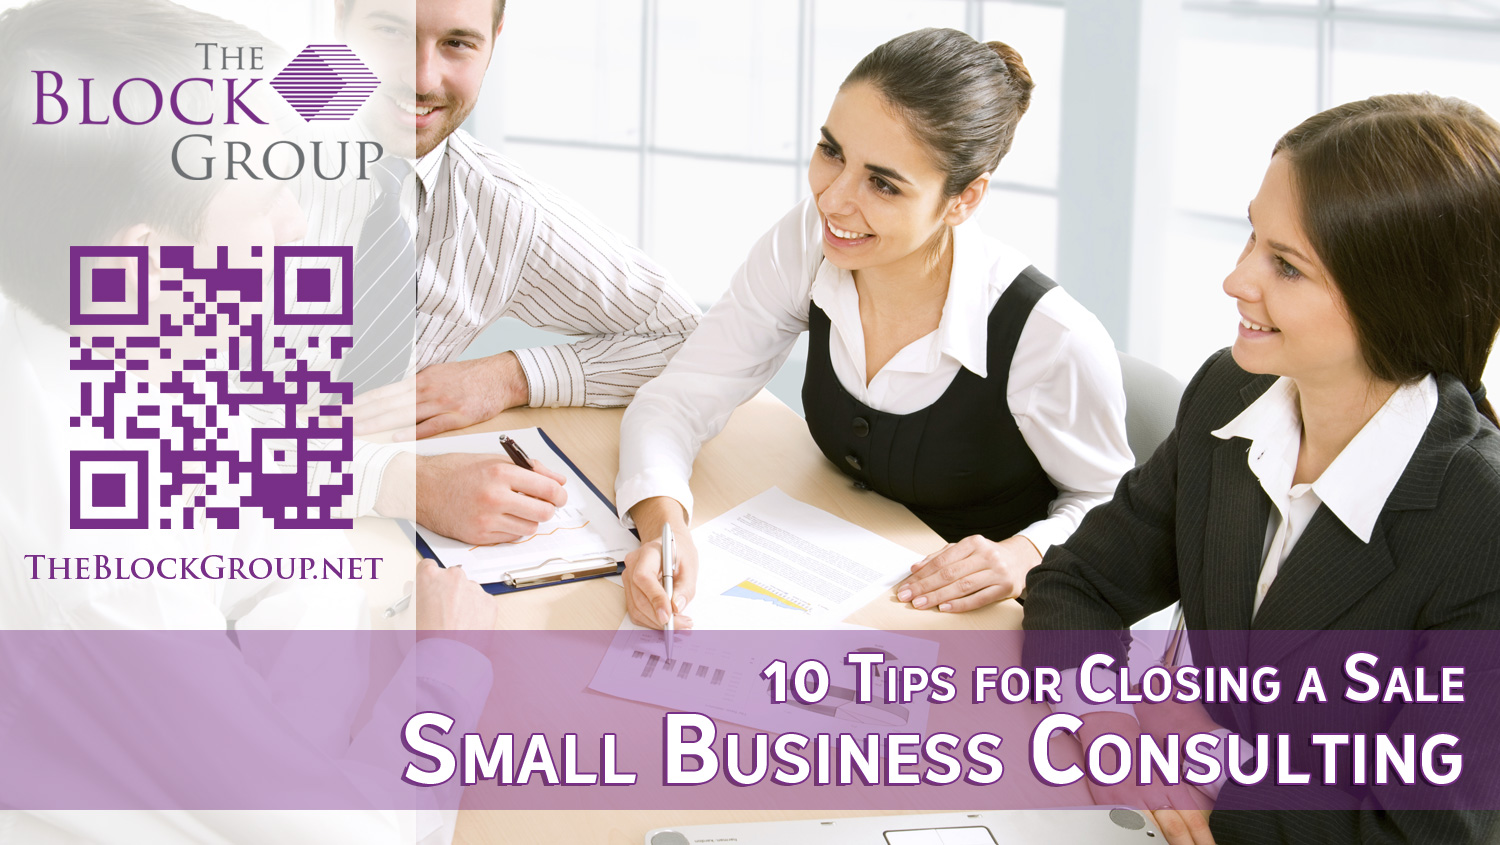 08-Financial-strategies-for-small-business